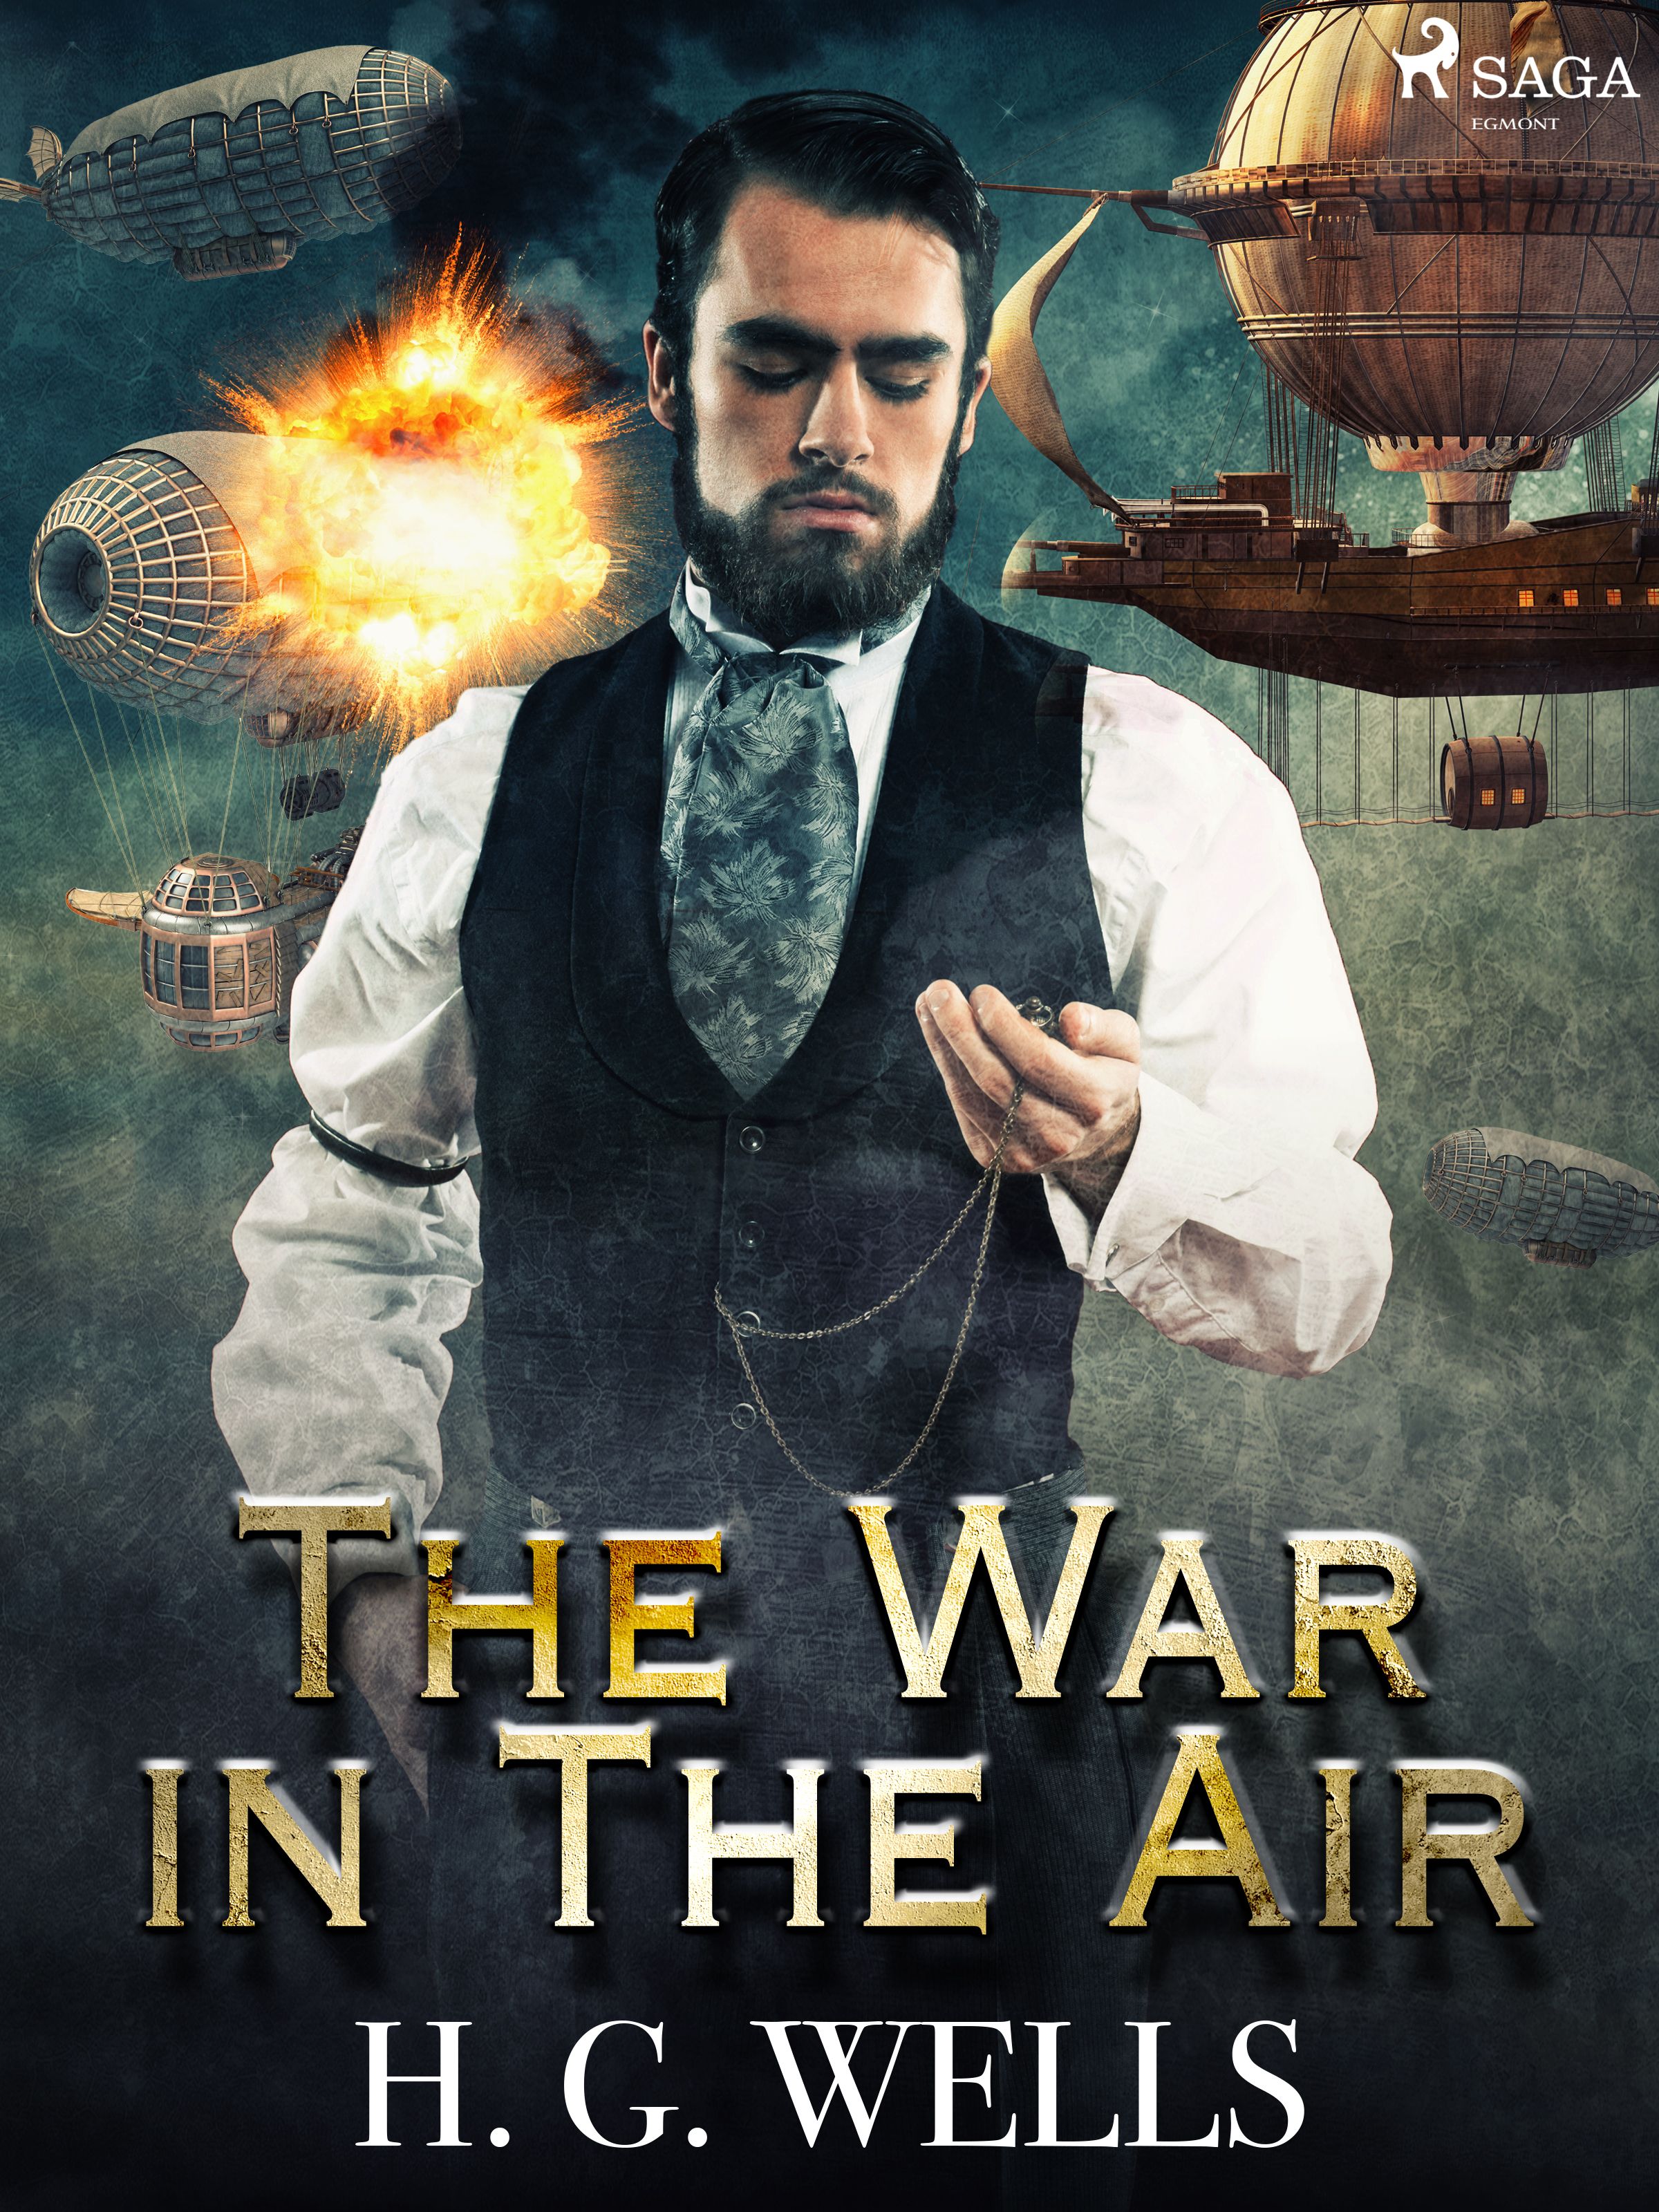 The War in The Air, eBook by H. G. Wells